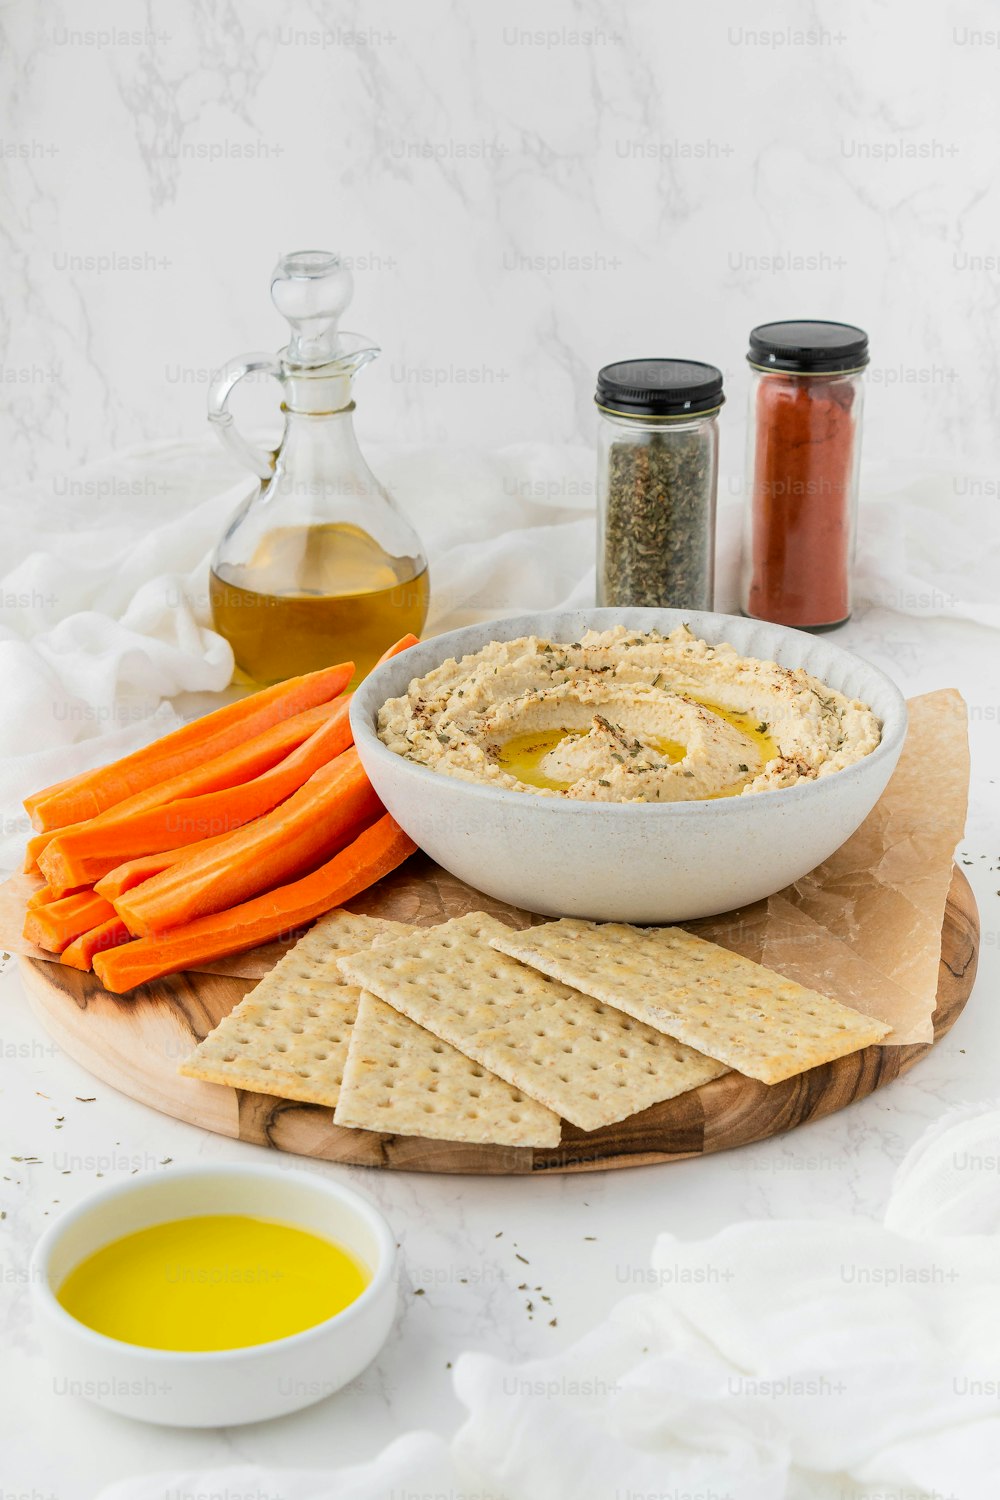 a bowl of hummus, carrots, and crackers on a board